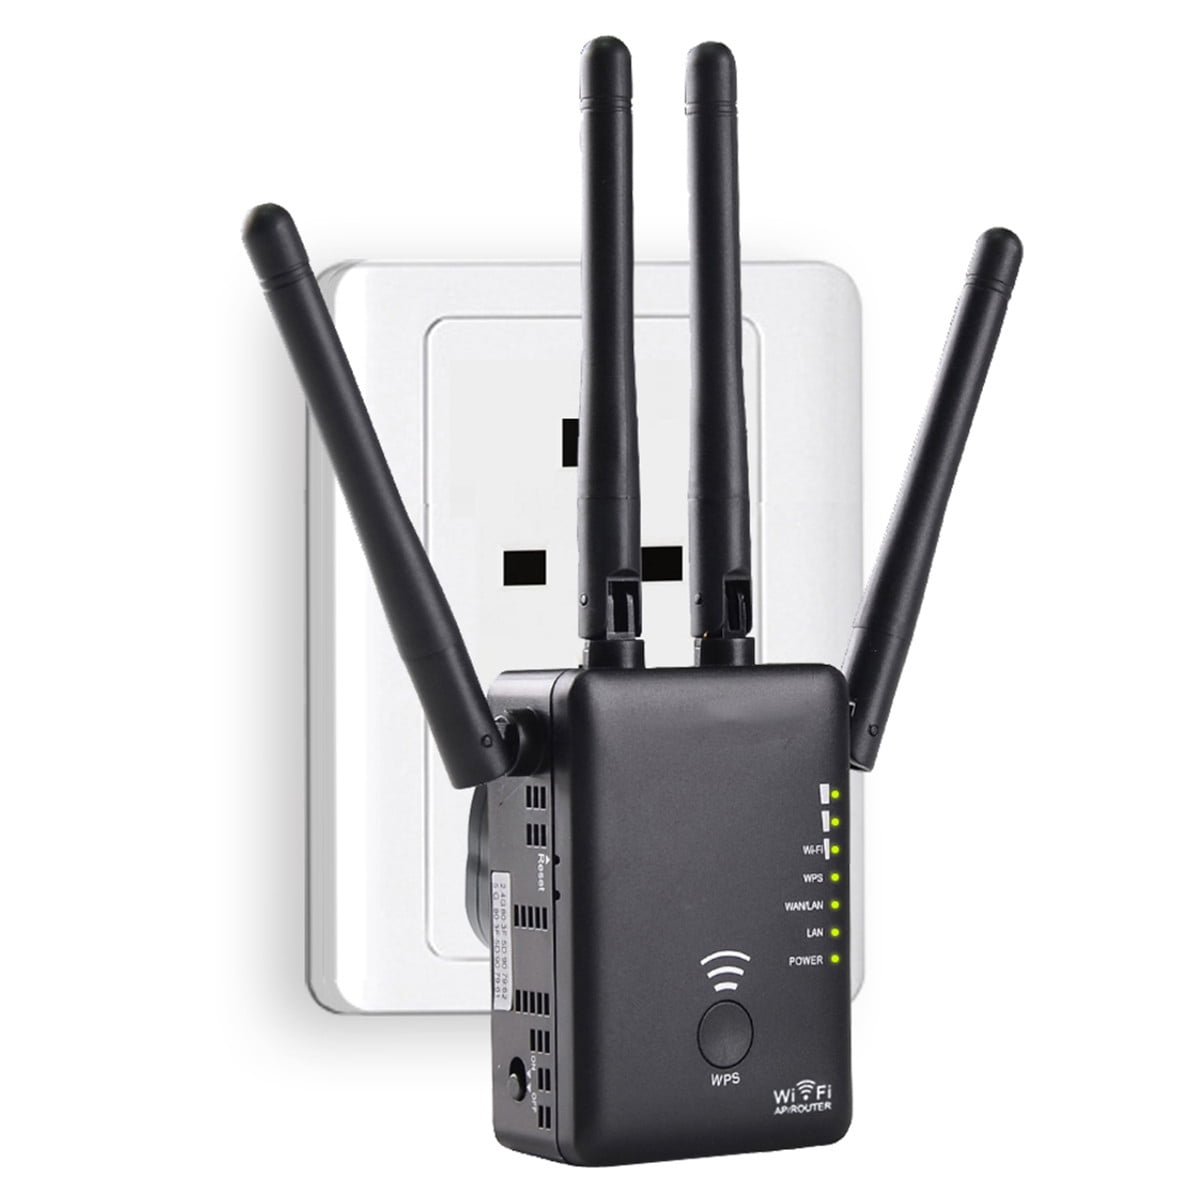 Wavlink N300 Super Wireless Range Extender/Access Point/Wireless Router/Repeater 